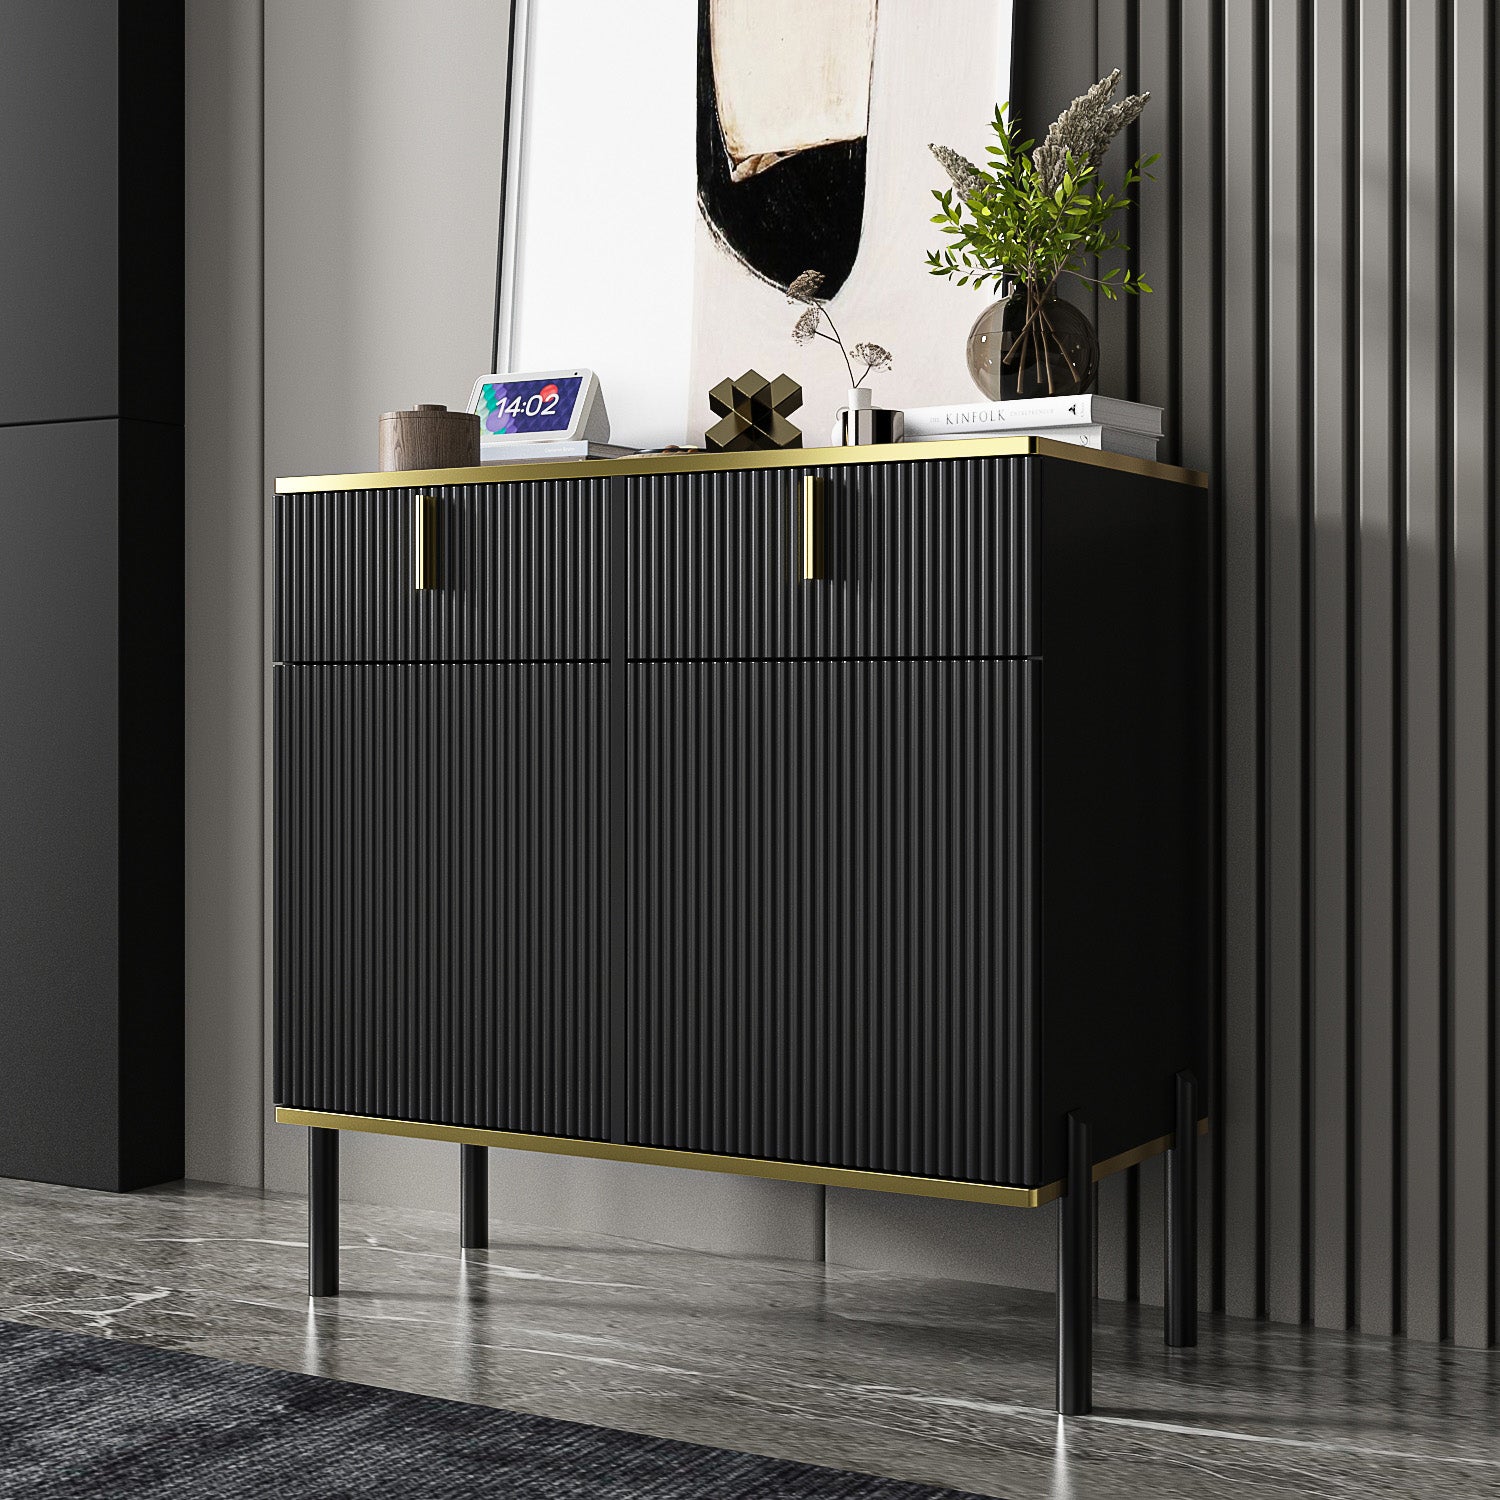 Wide Sideboard Buffet Storage Cabinet in Black with Drawer & Pop-up Doors